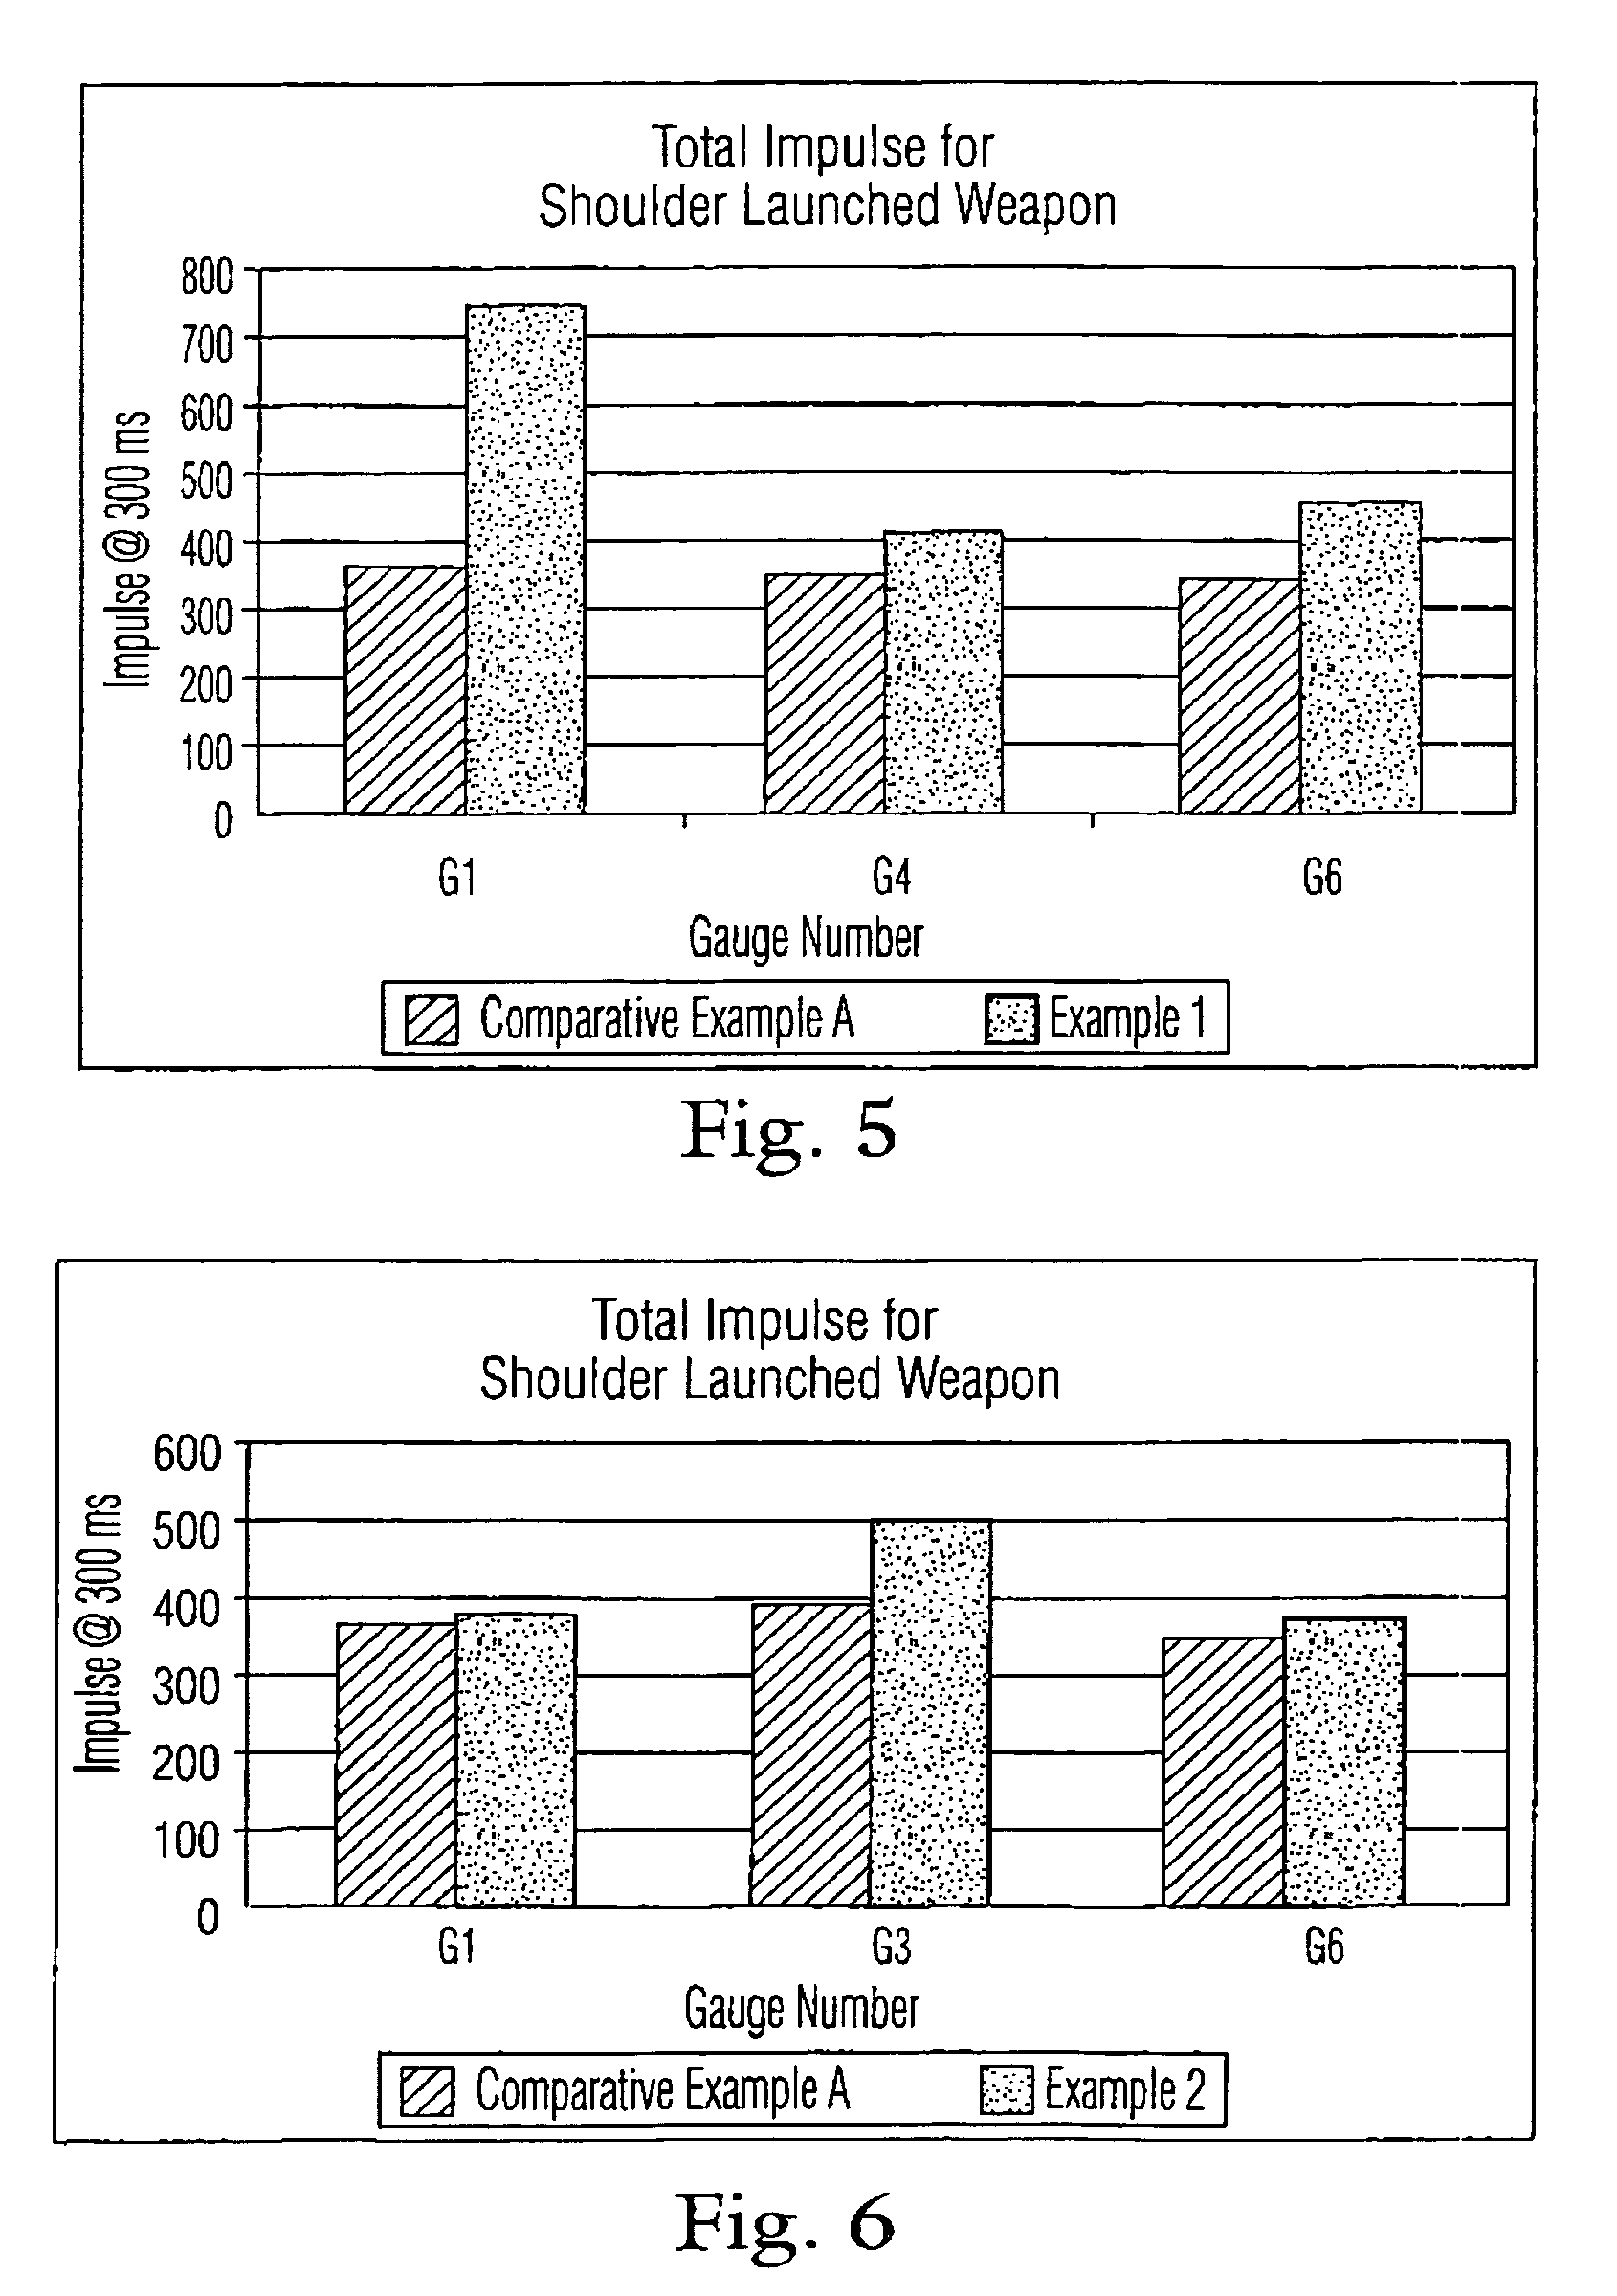 Thermobaric explosives and compositions, and articles of manufacture and methods regarding the same